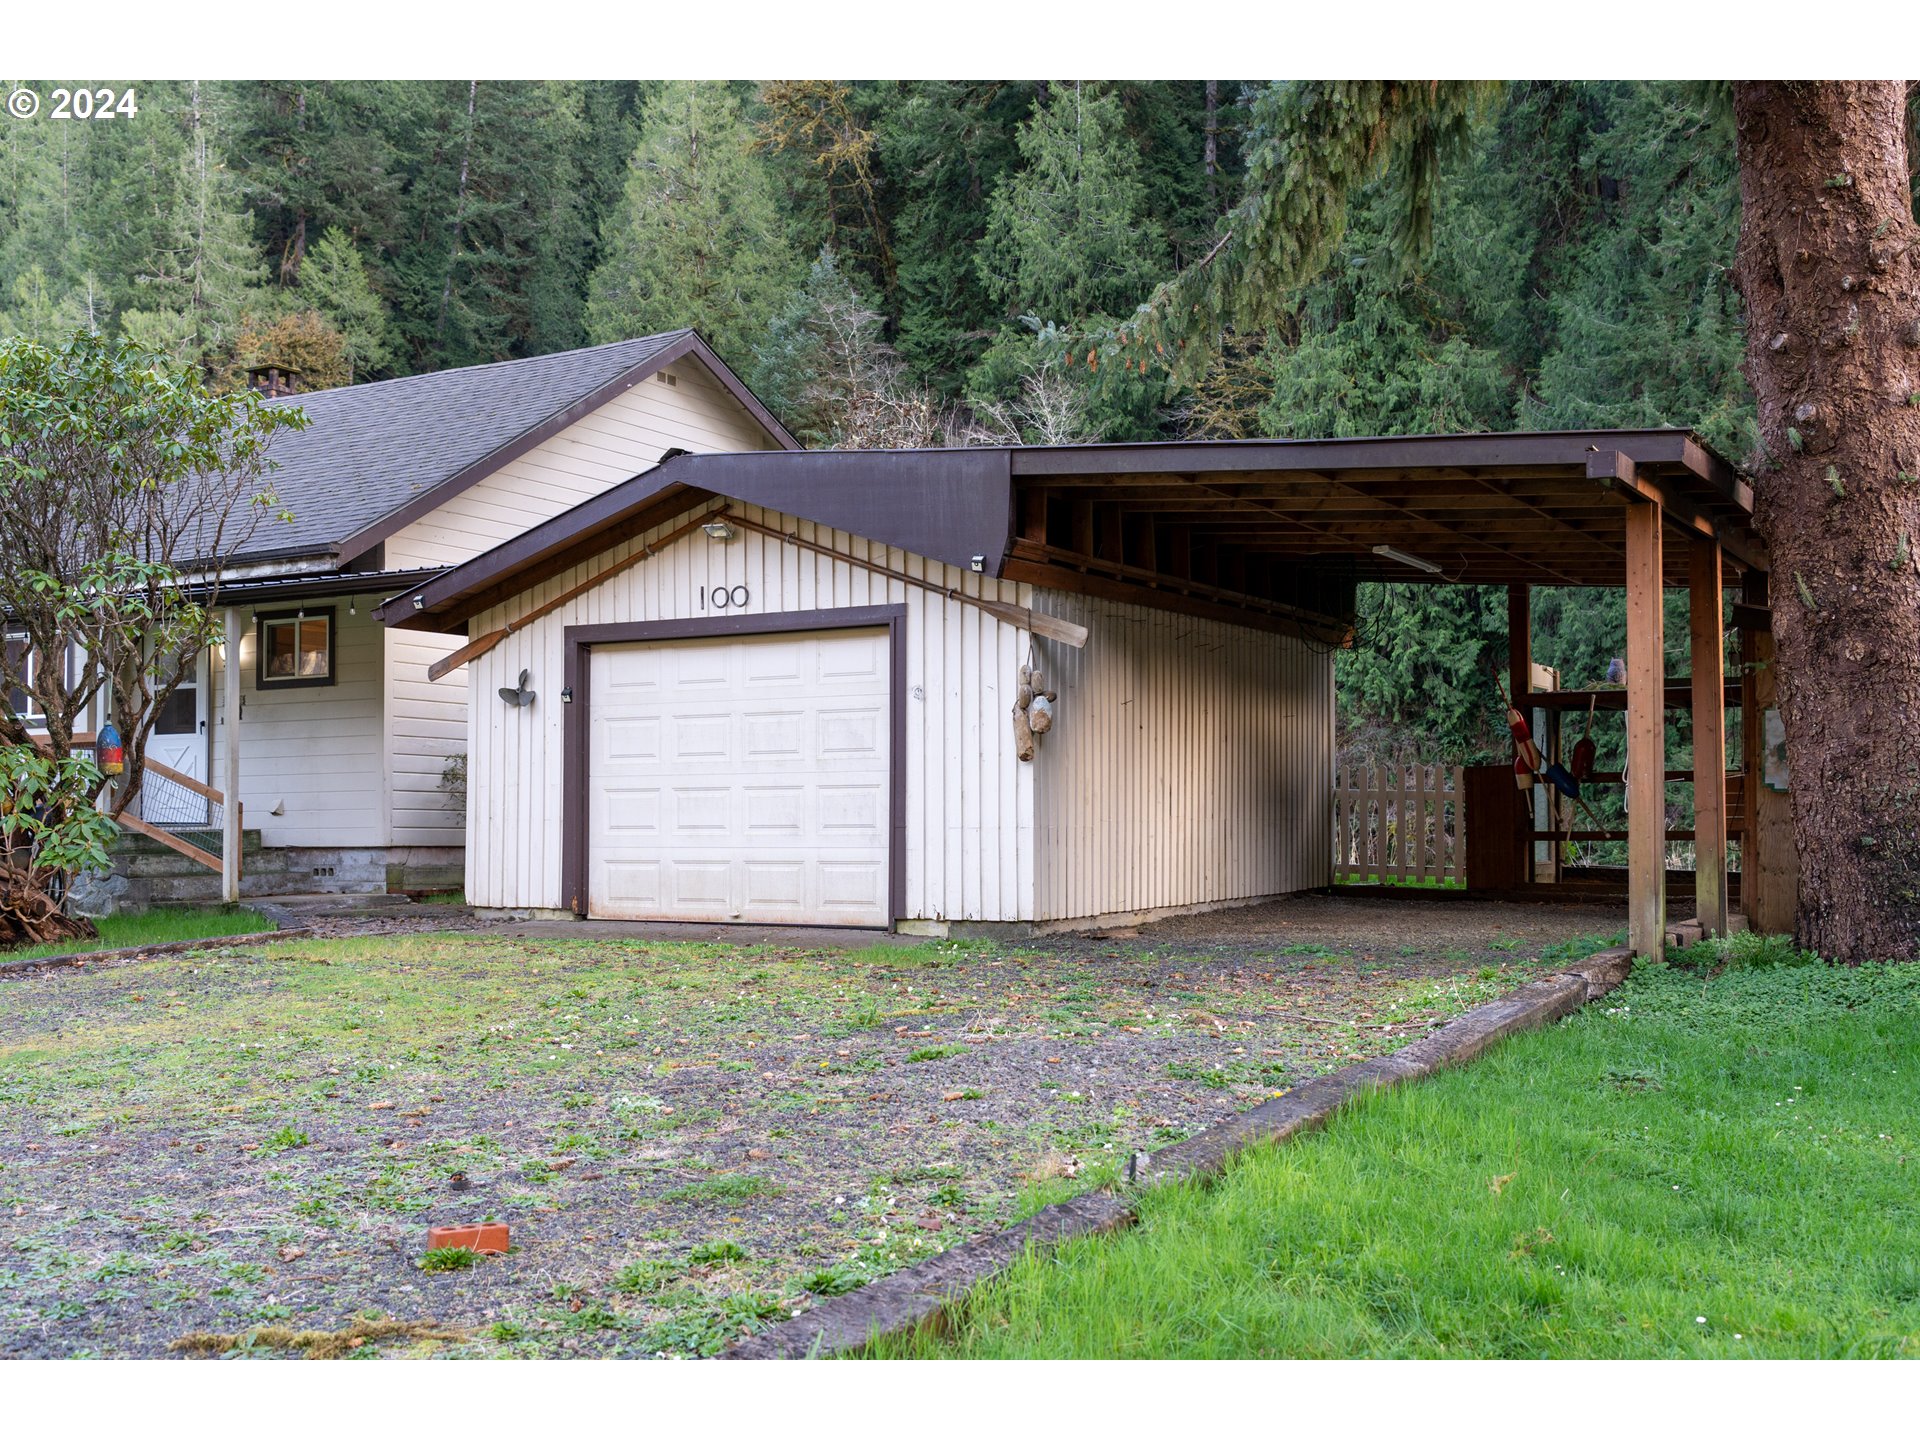 100 E LITTLE ALBANY LOOP, Waldport, OR 